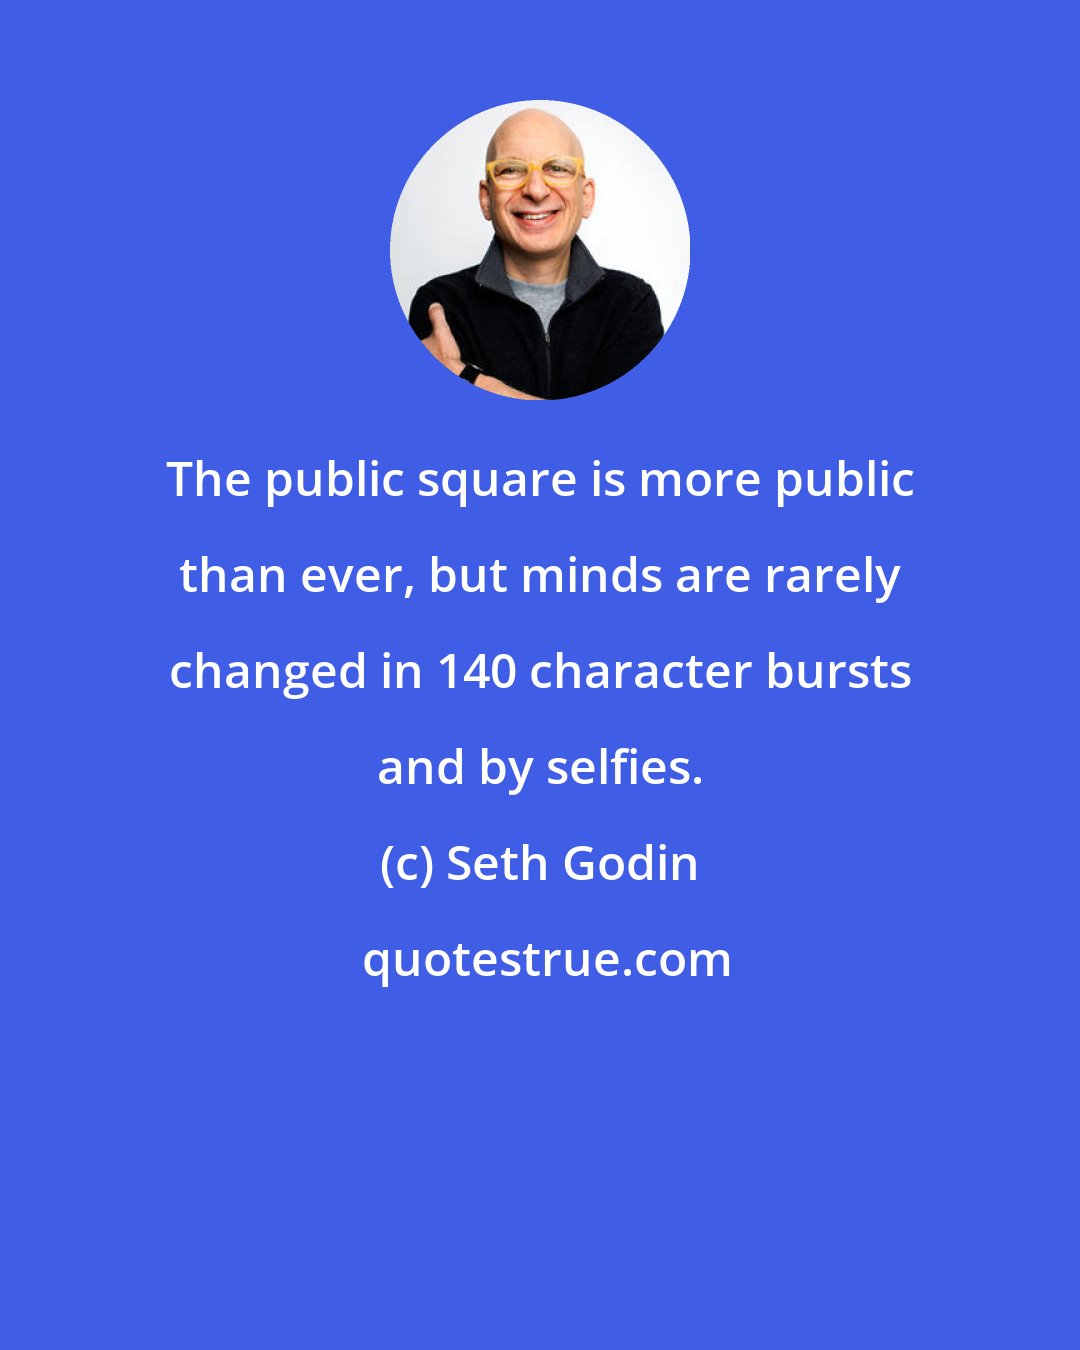 Seth Godin: The public square is more public than ever, but minds are rarely changed in 140 character bursts and by selfies.